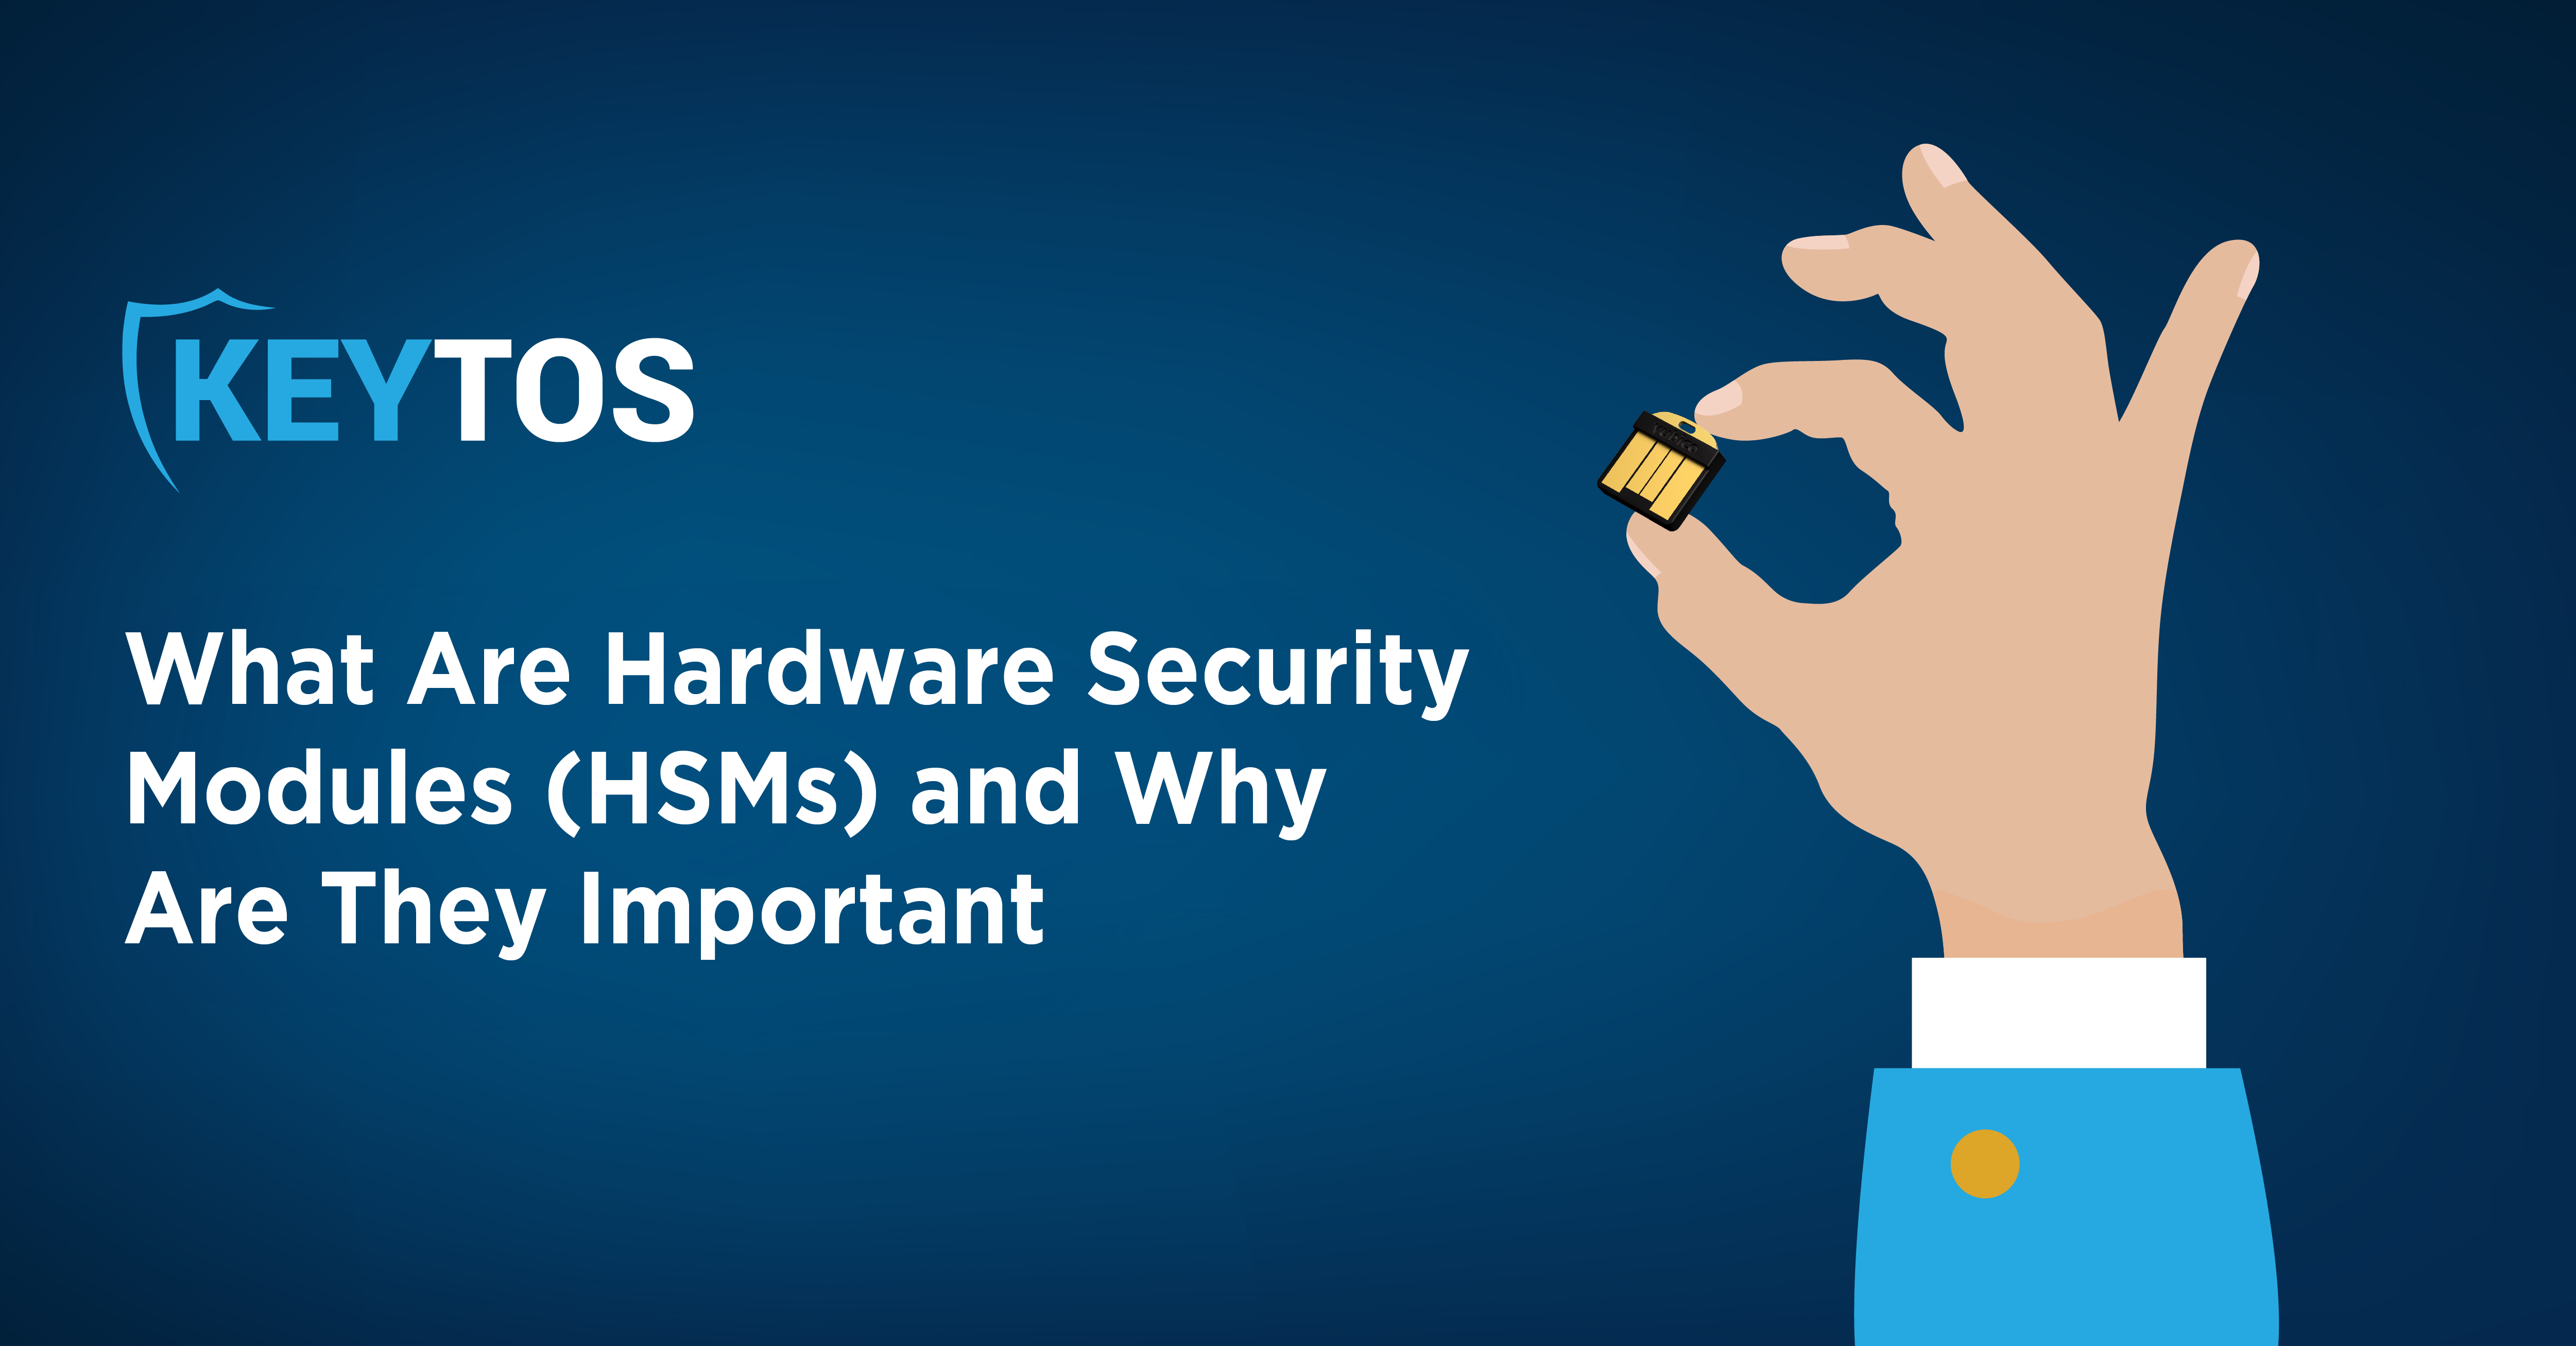 What Are HSMs and Why Are They Important?